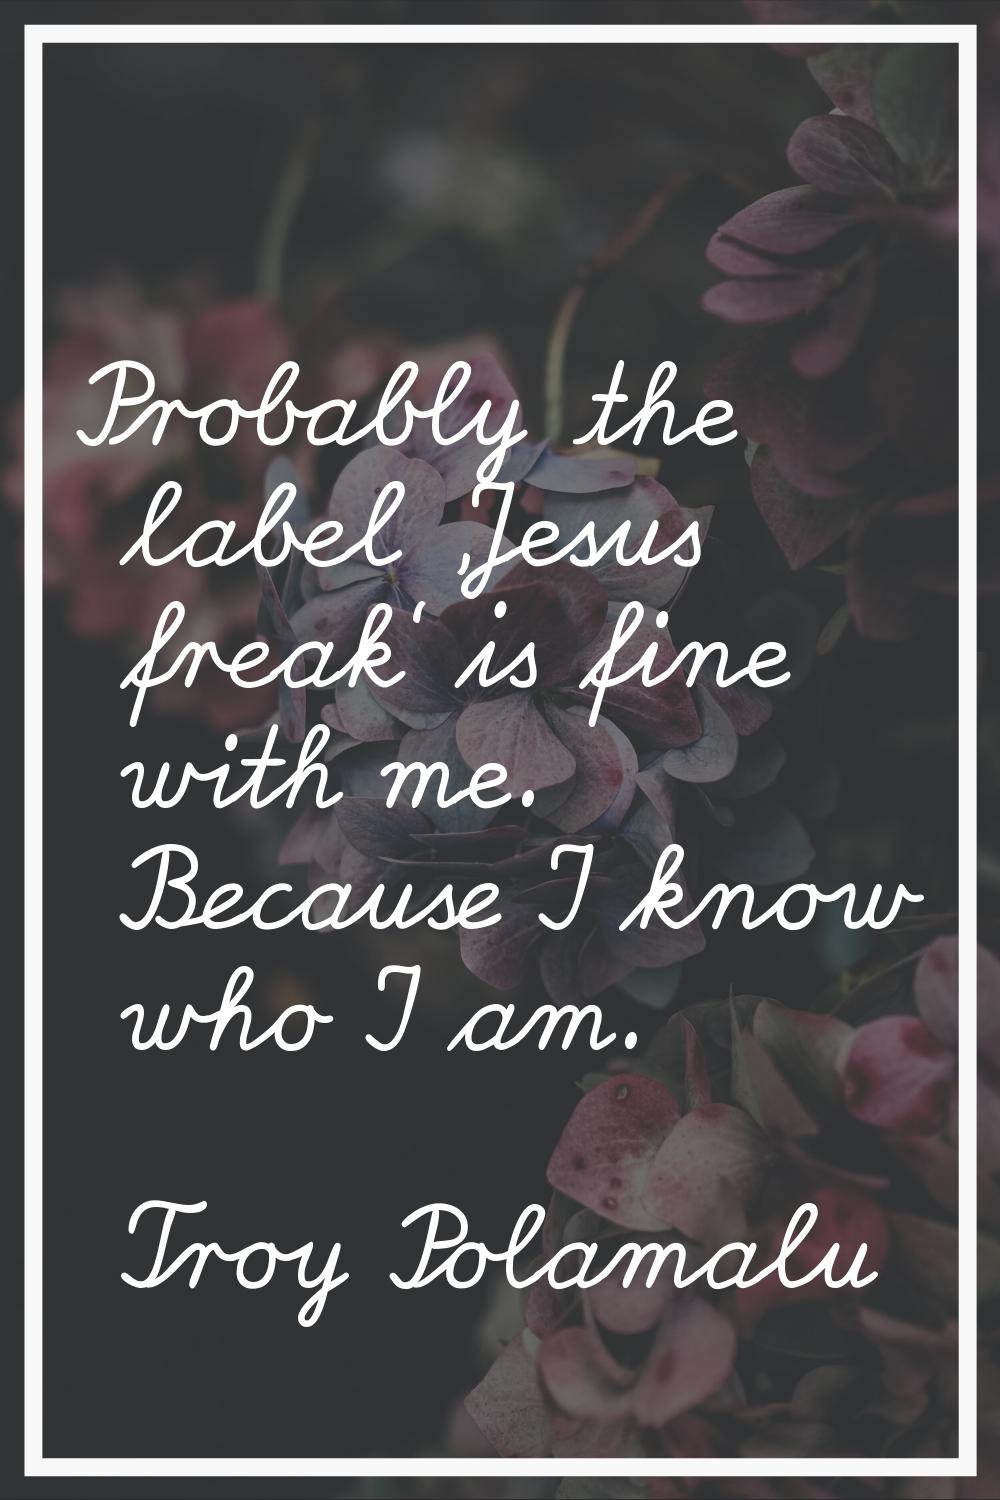 Probably the label 'Jesus freak' is fine with me. Because I know who I am.